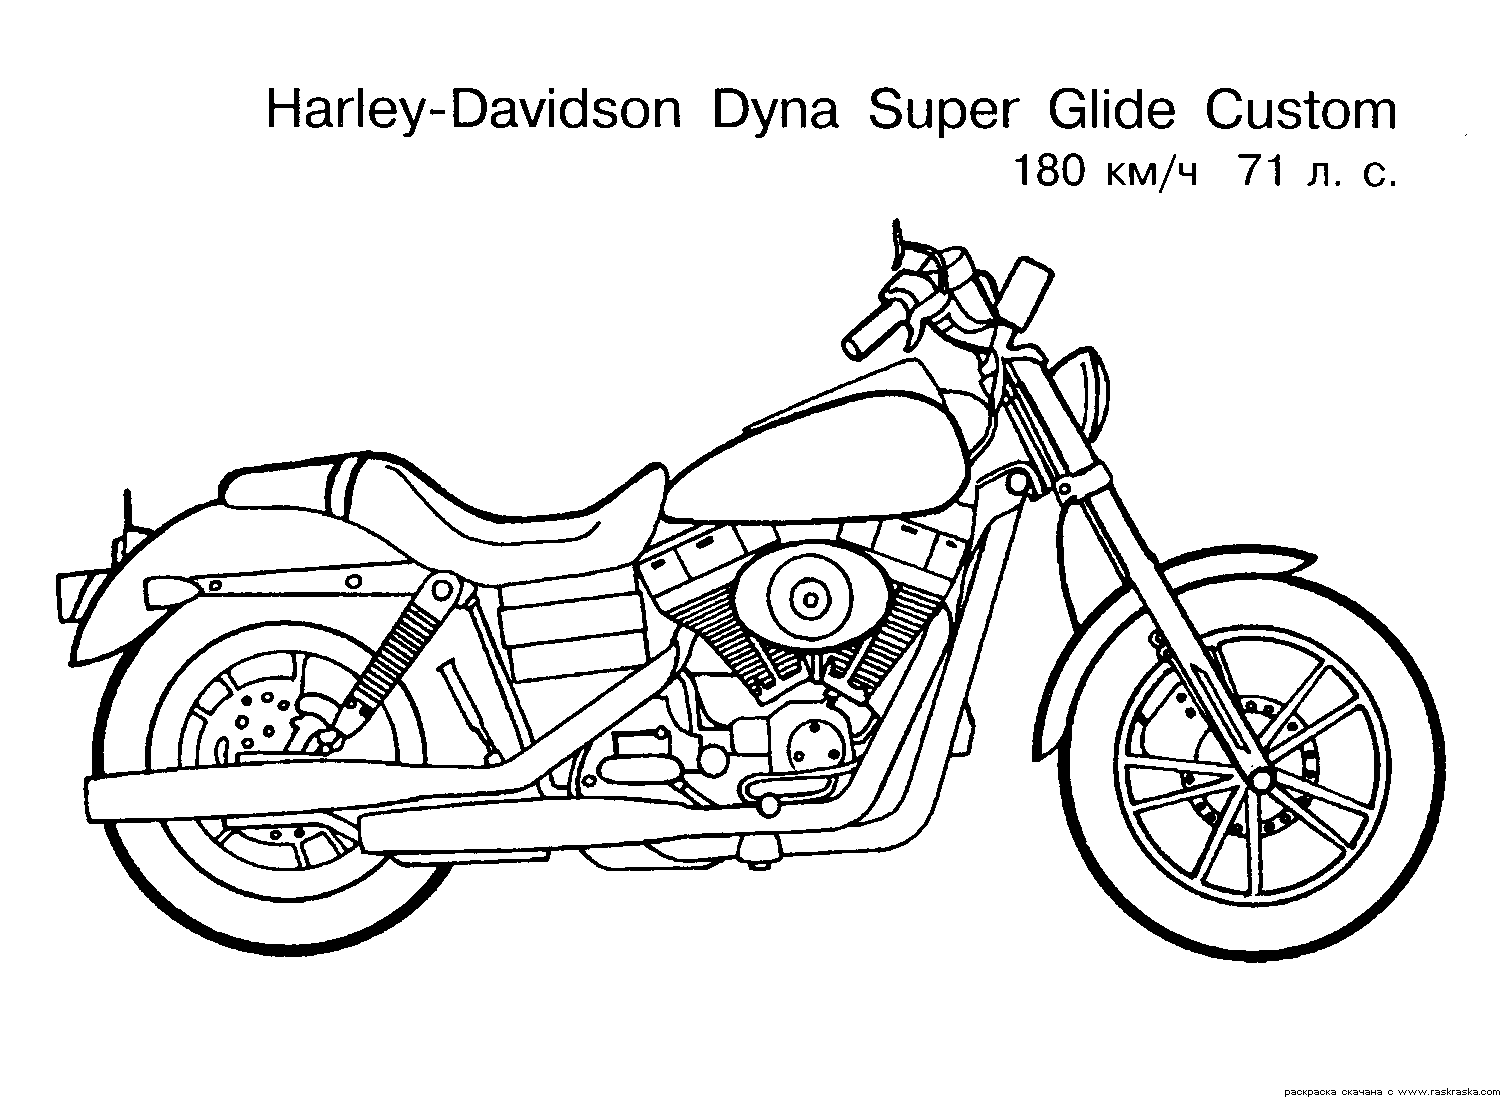  Free Motorcycle coloring page, letscoloringpages.com, Harley Davidson Dyna Custom